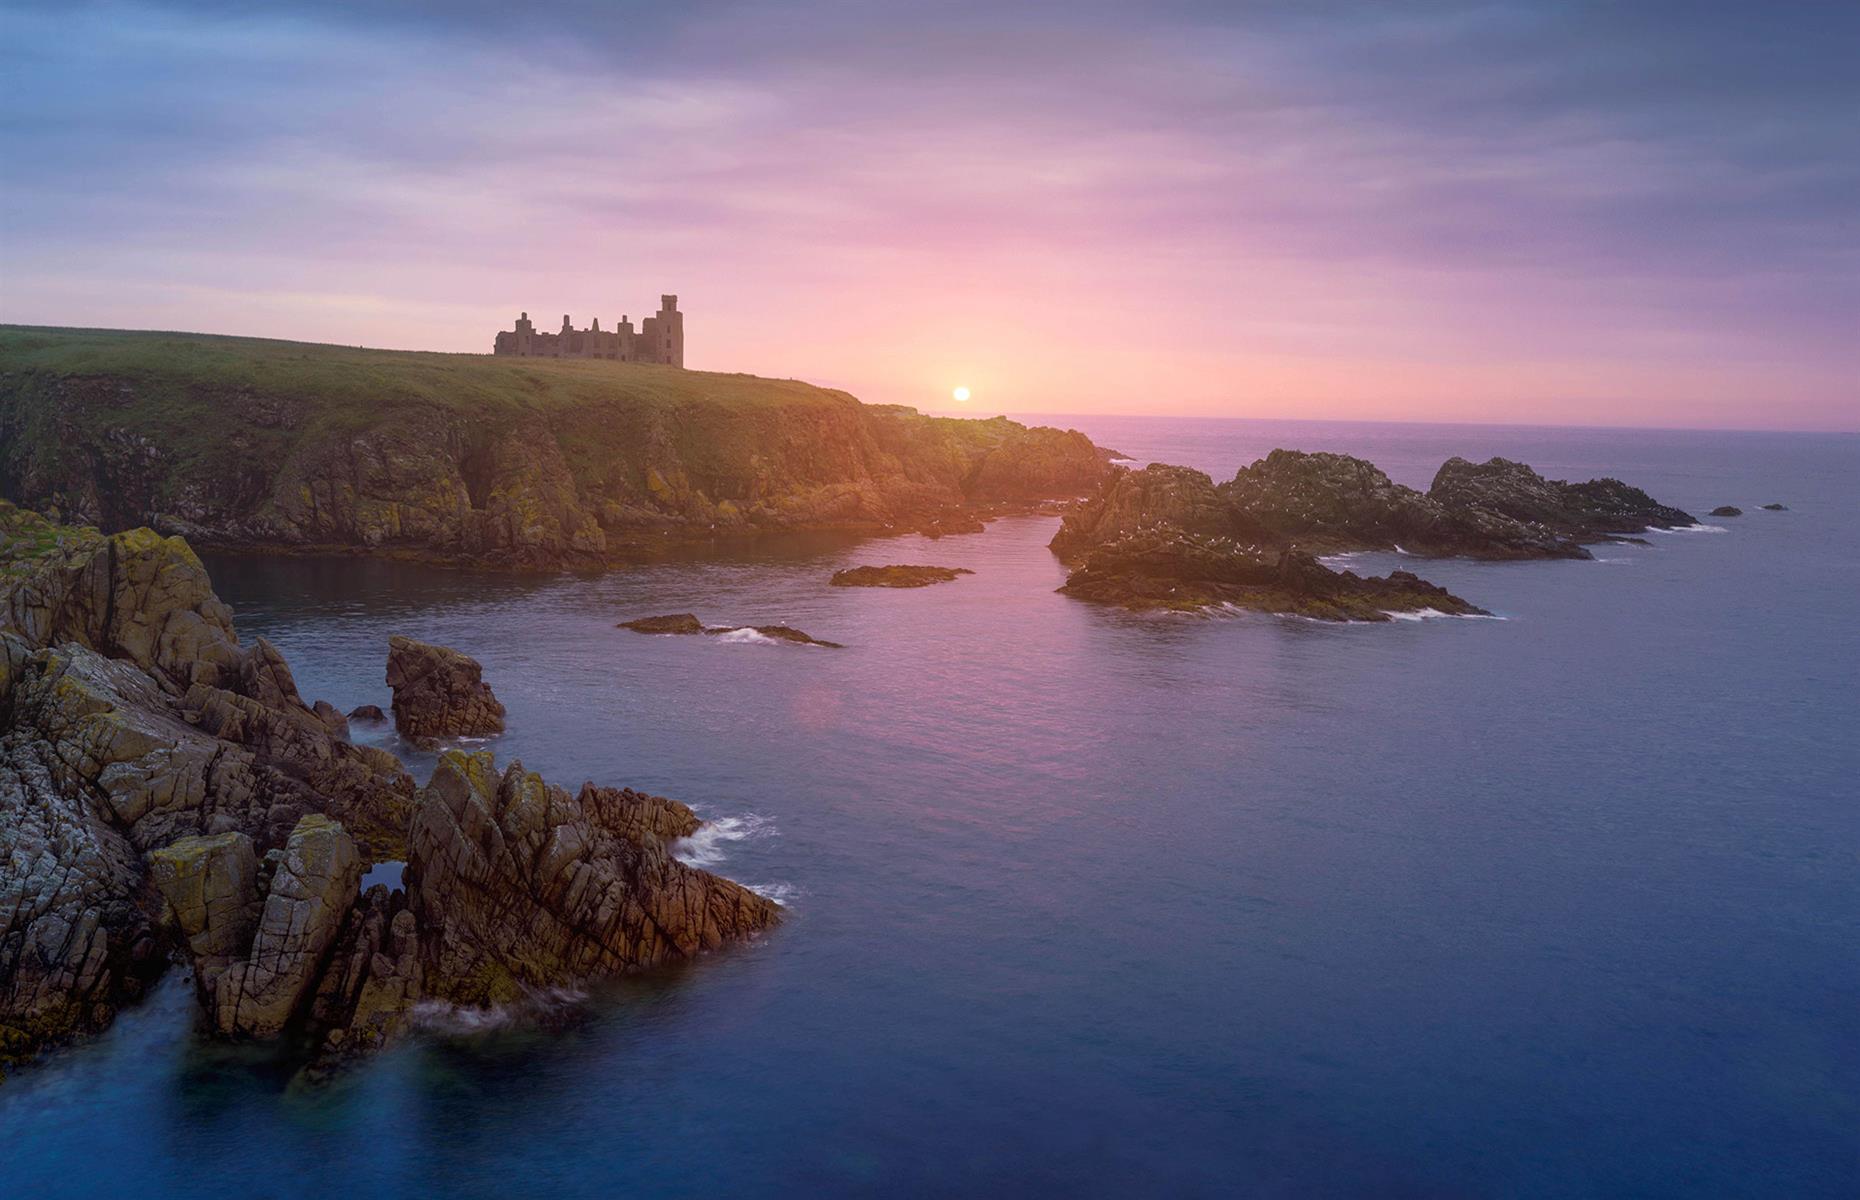 <p><a href="https://www.visitabdn.com/listing/slains-castle">Slains Castle</a>, near Cruden Bay, is worth a visit for any fans of Gothic fiction as it is widely believed that it provided inspiration for the castle in Bram Stoker's <em>Dracula</em>. It's certainly true that Stoker would have known it – he holidayed nearby regularly before writing the book, and the castle, which would have been in a much better state of repair back then, also has an octagonal hall, much like Dracula's castle.</p>